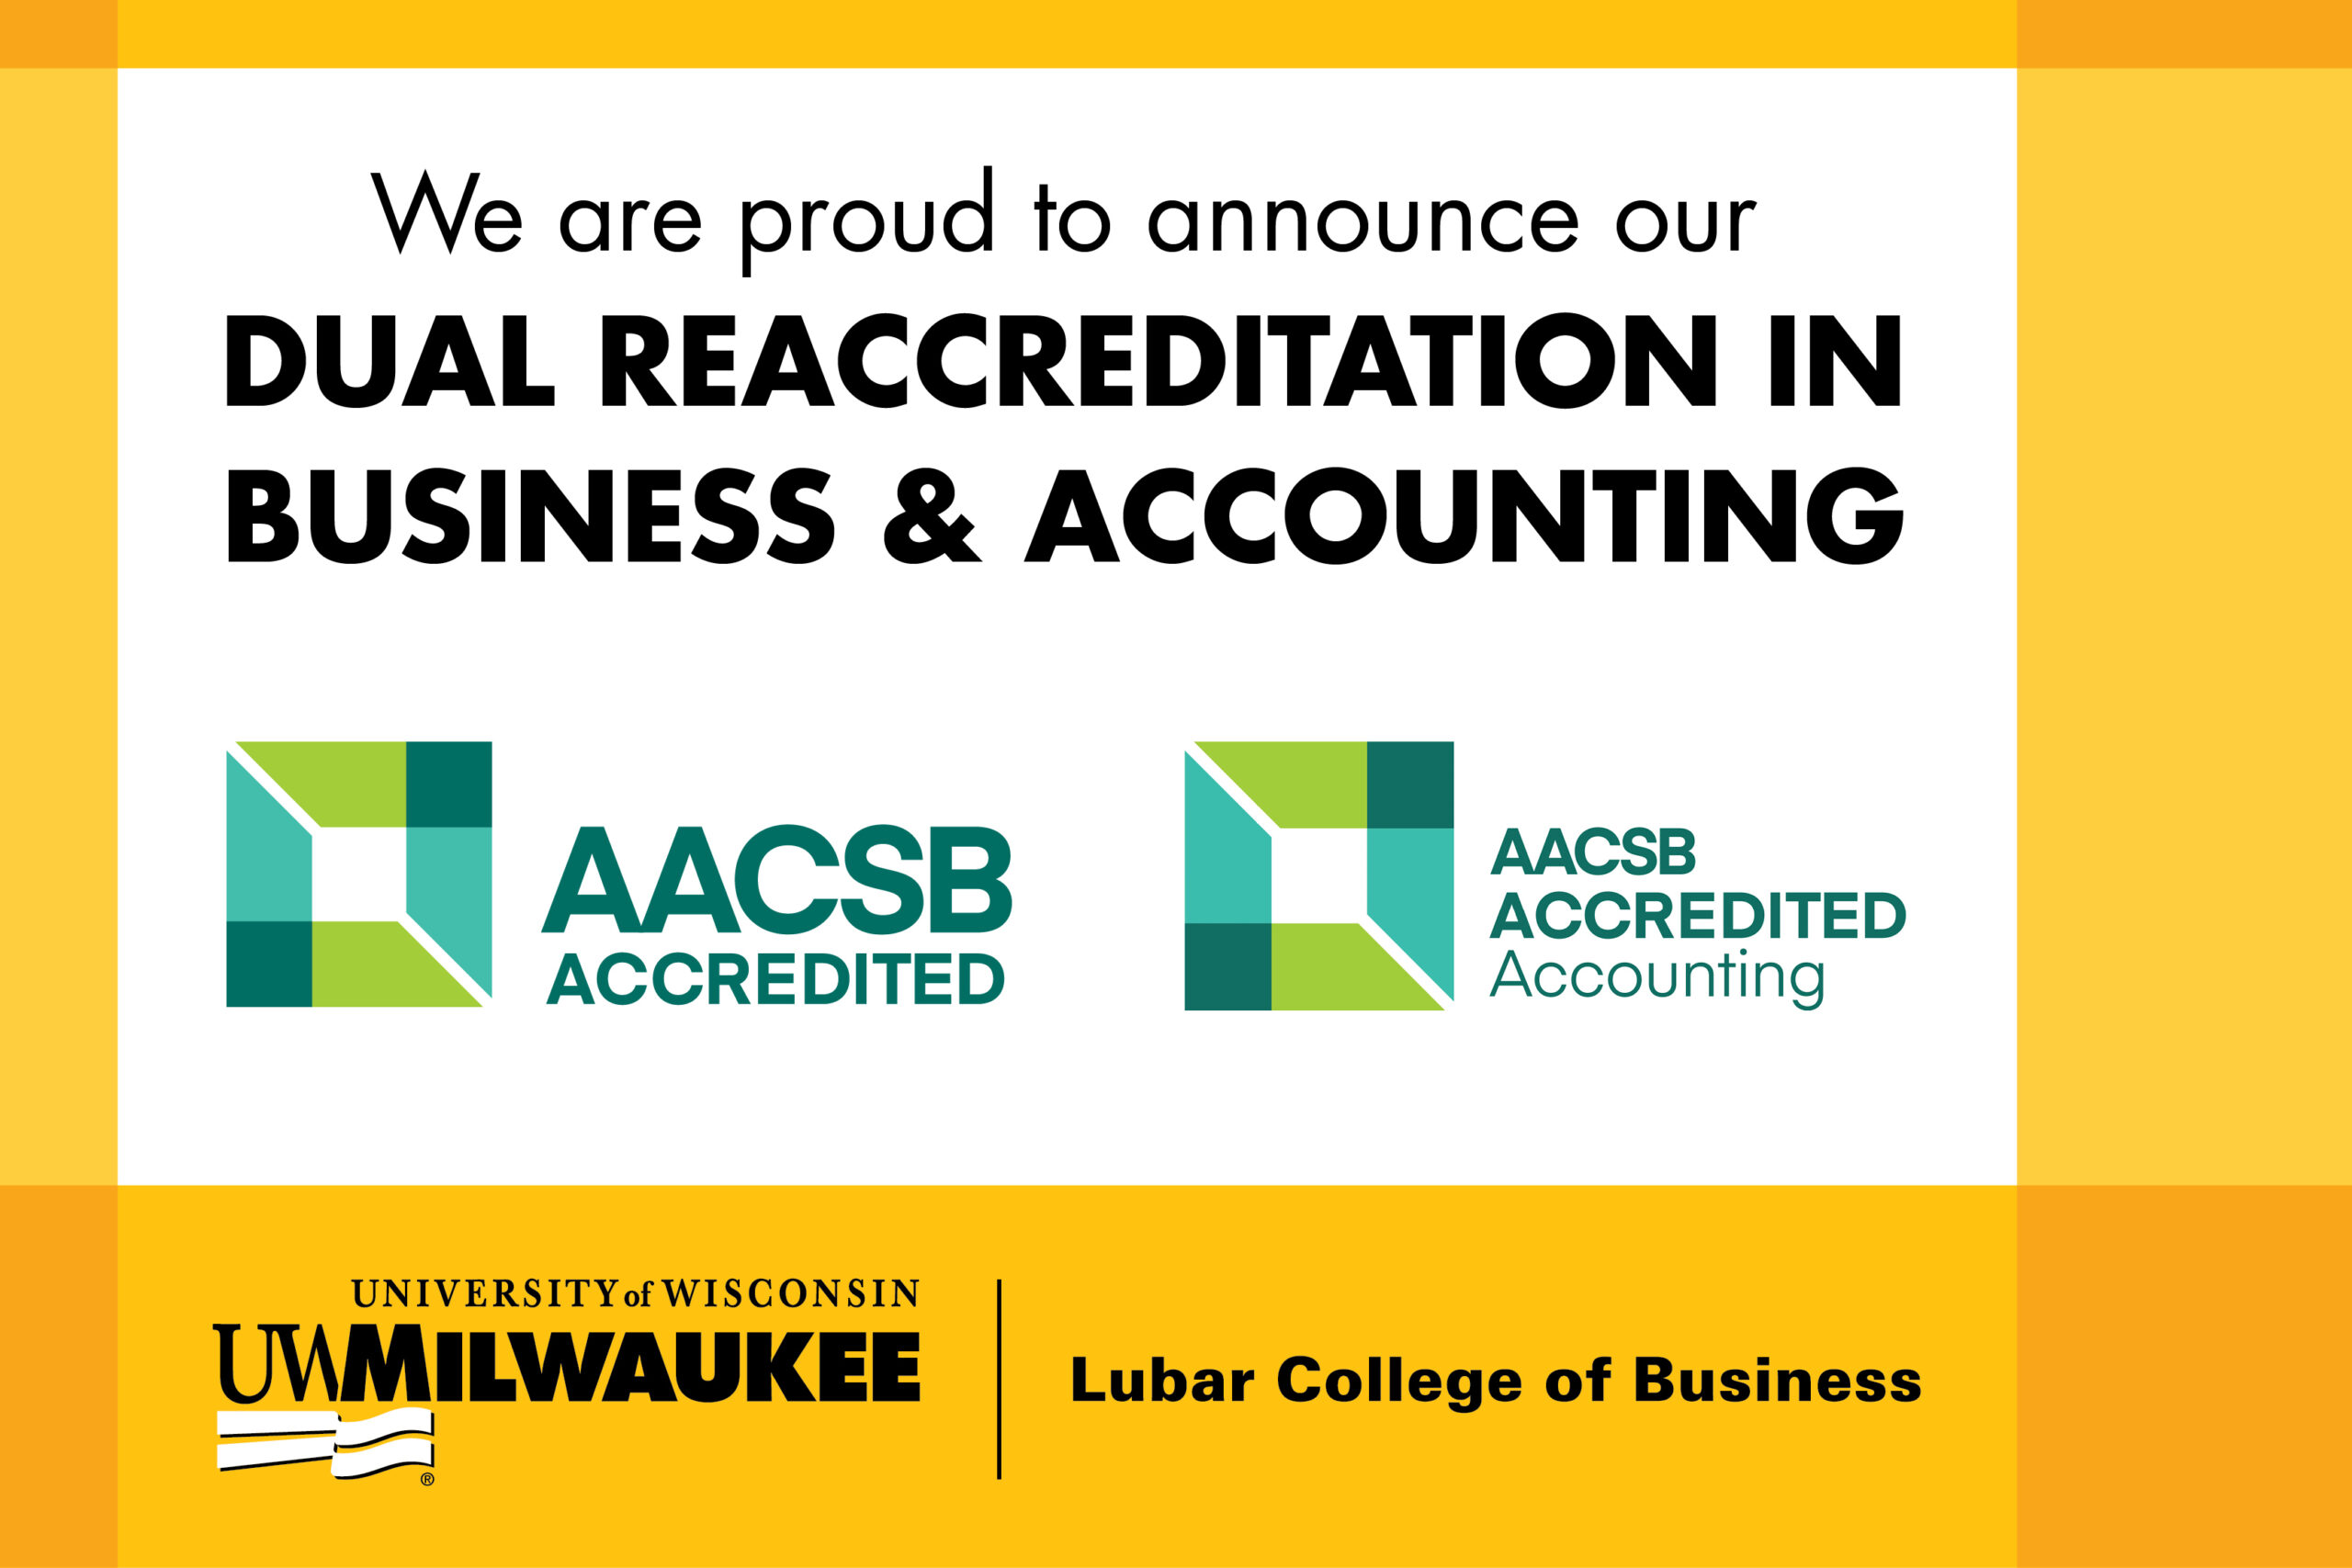 AACSB Extends Lubar College of Business Accreditation